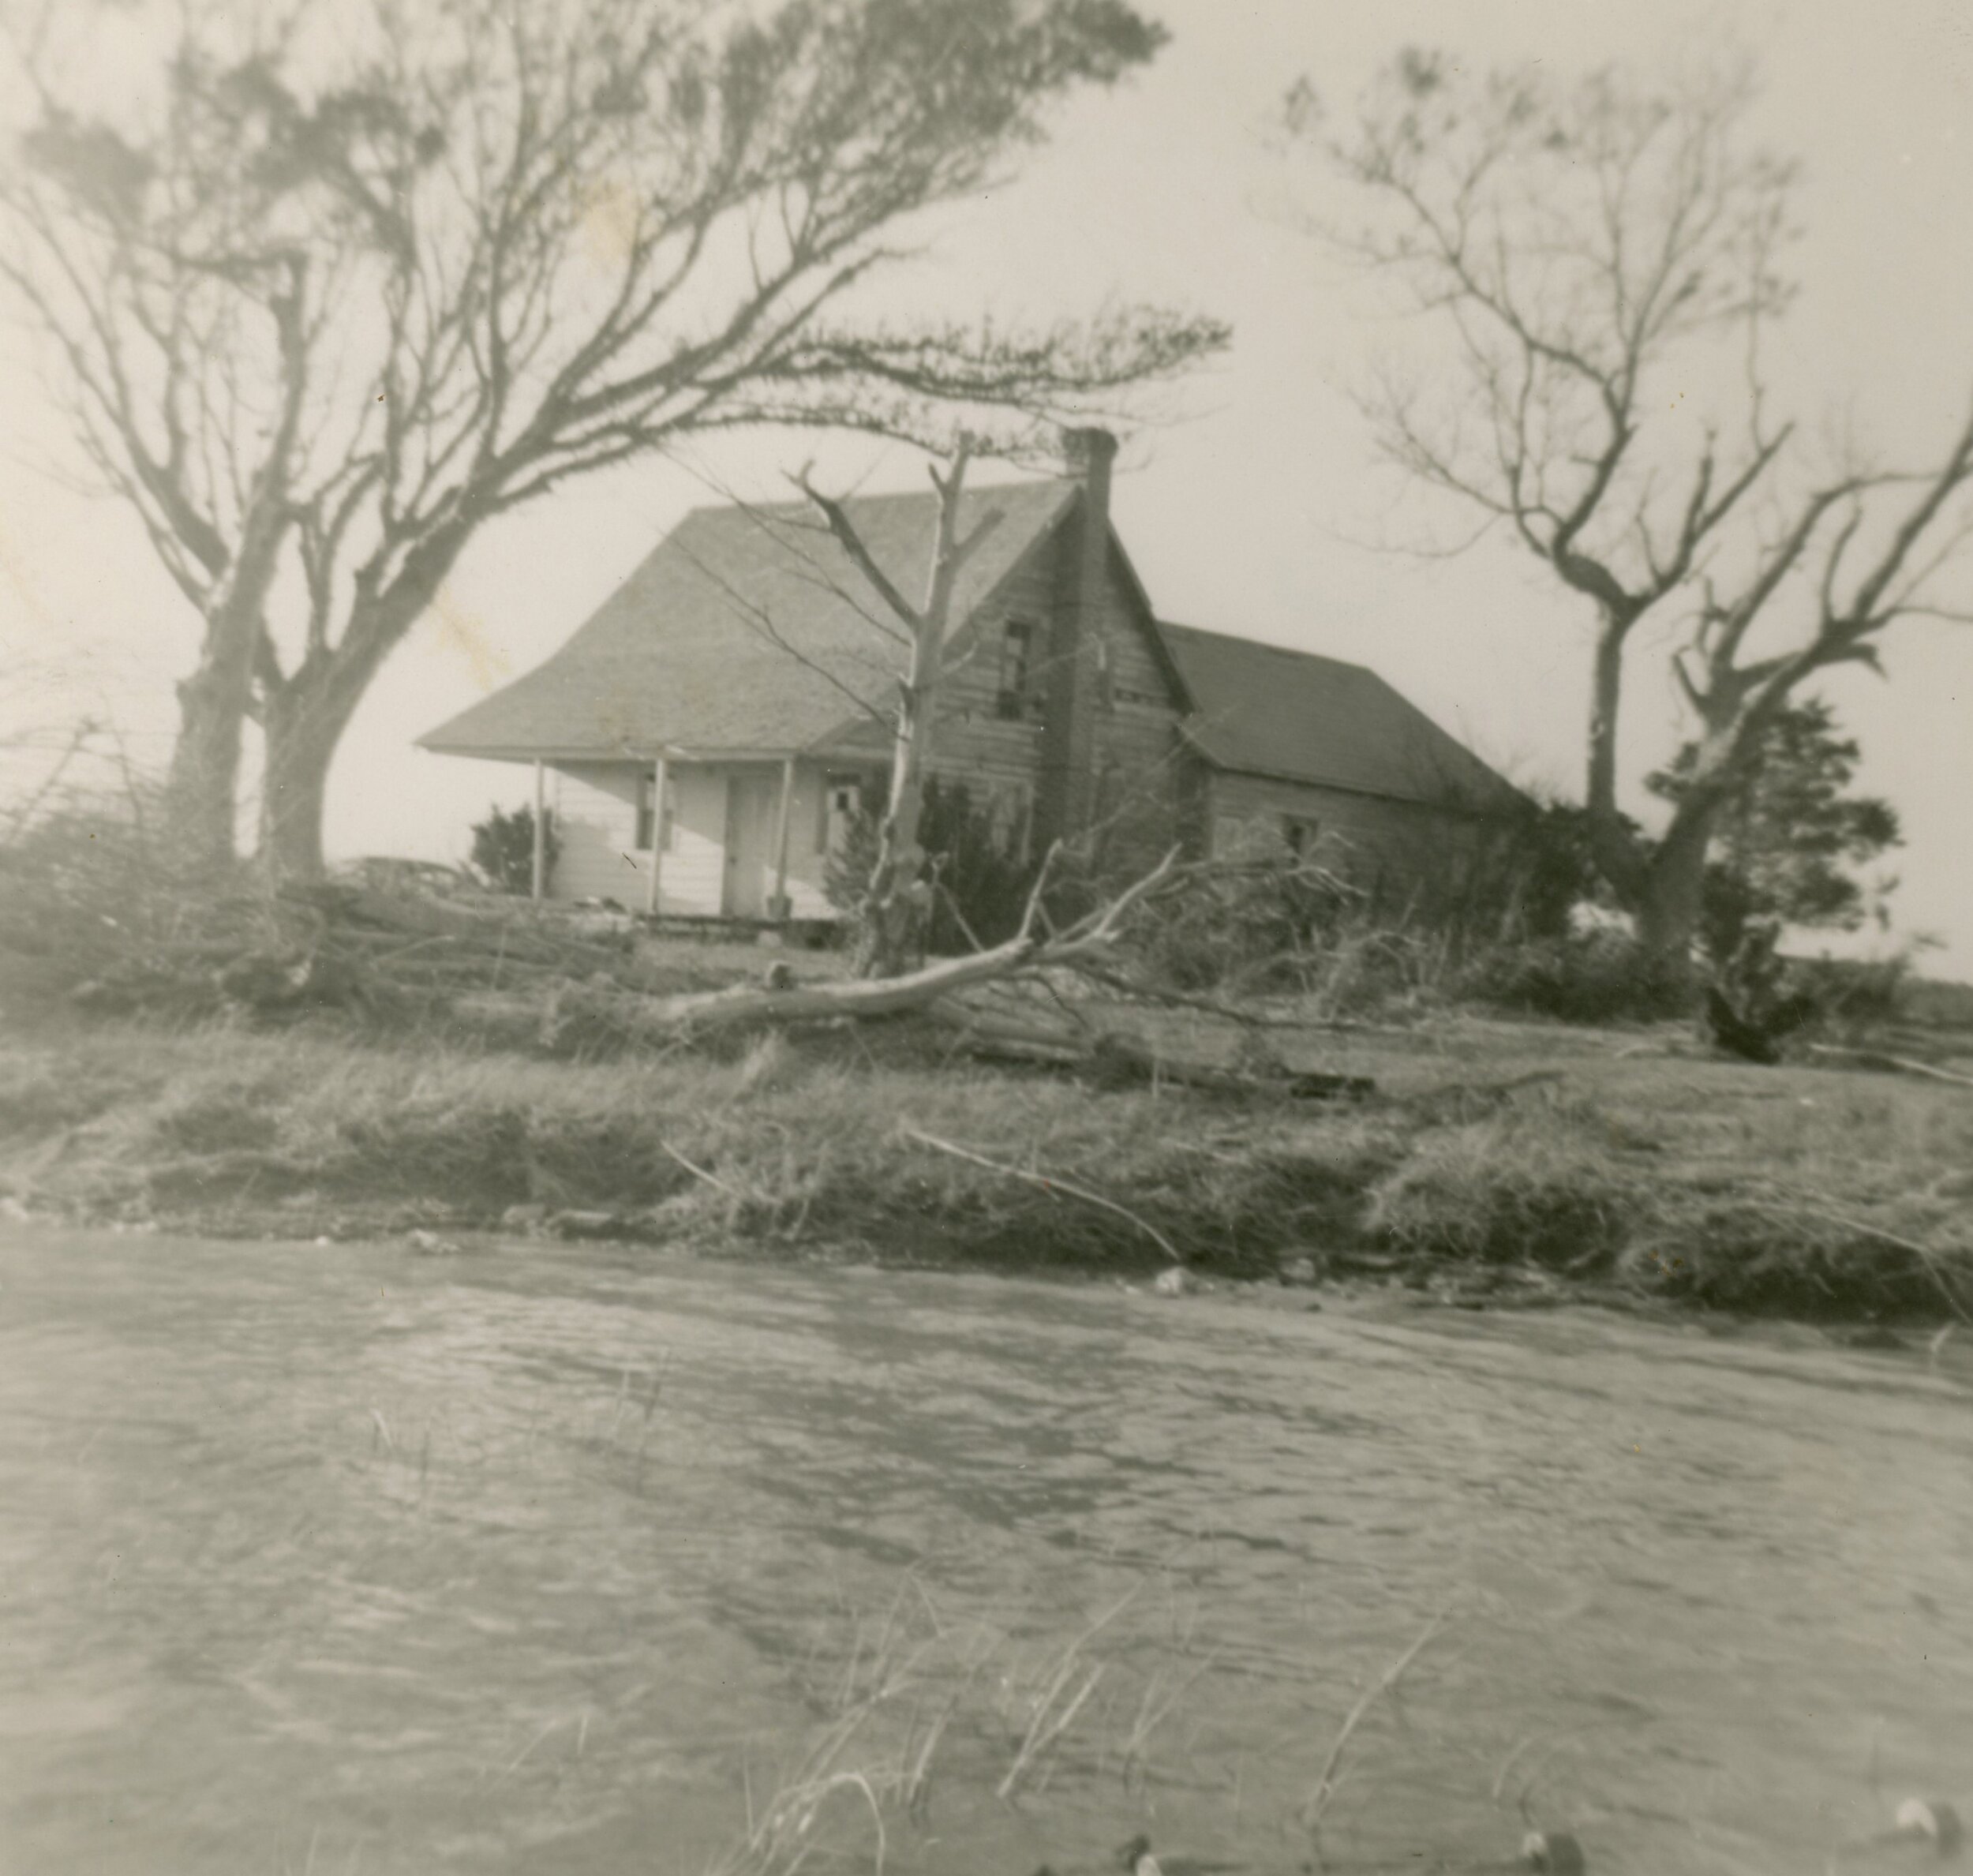 Aunt Gertie’s house after a hurricane